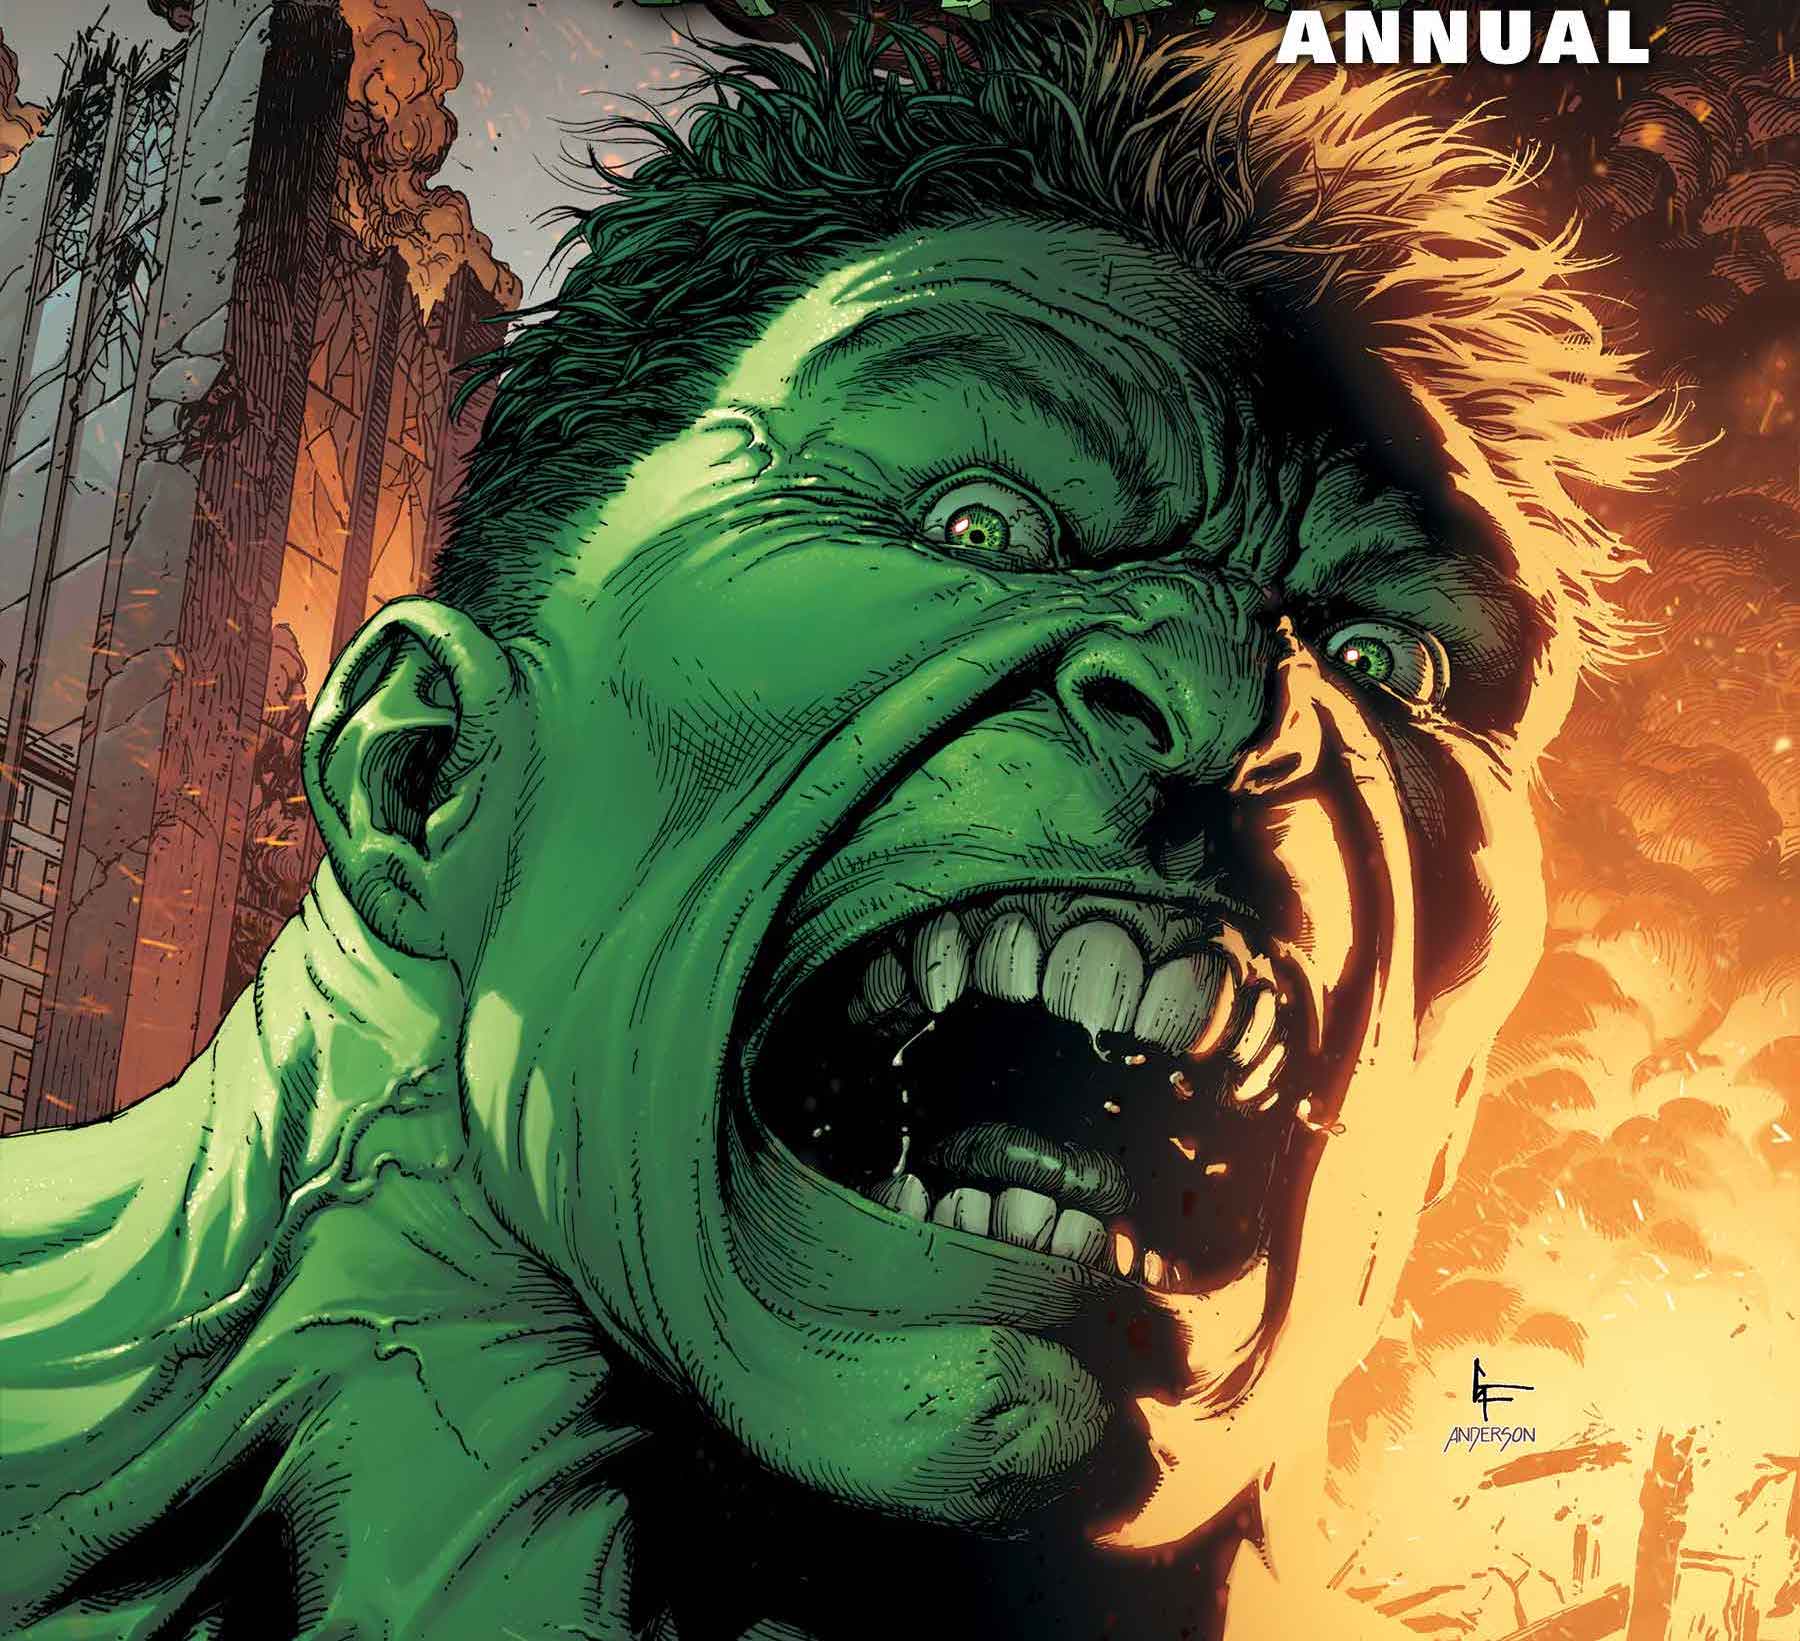 'Hulk Annual' #1 takes a 'found footage' approach this May